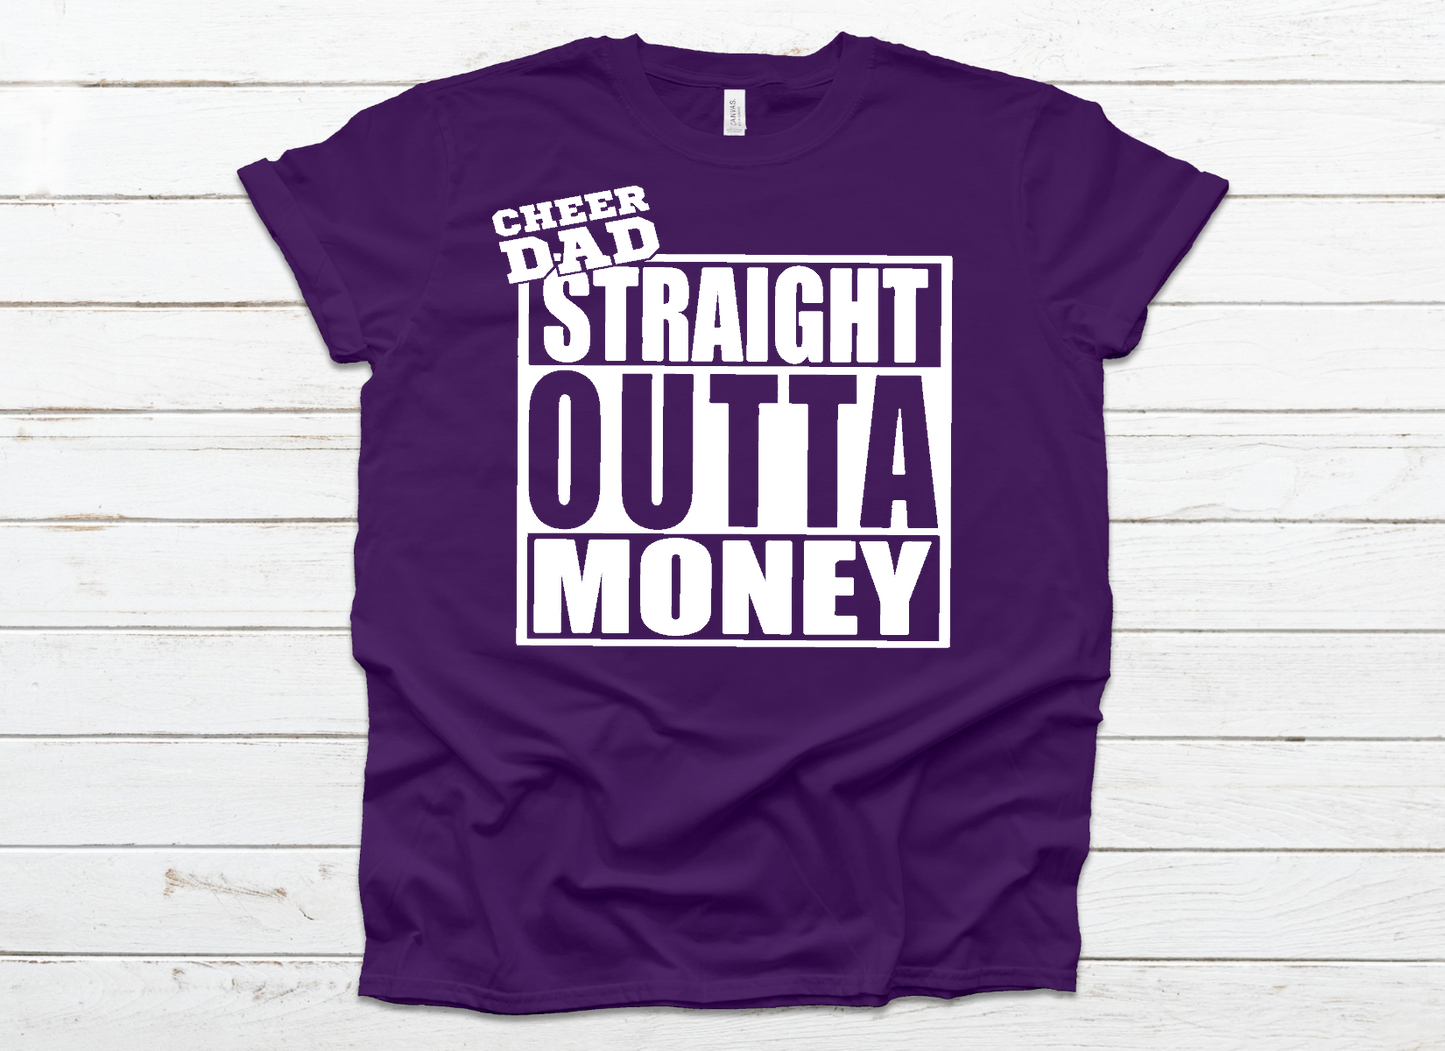 Cheer Dad straight outta money *Choose color from drop down menu*